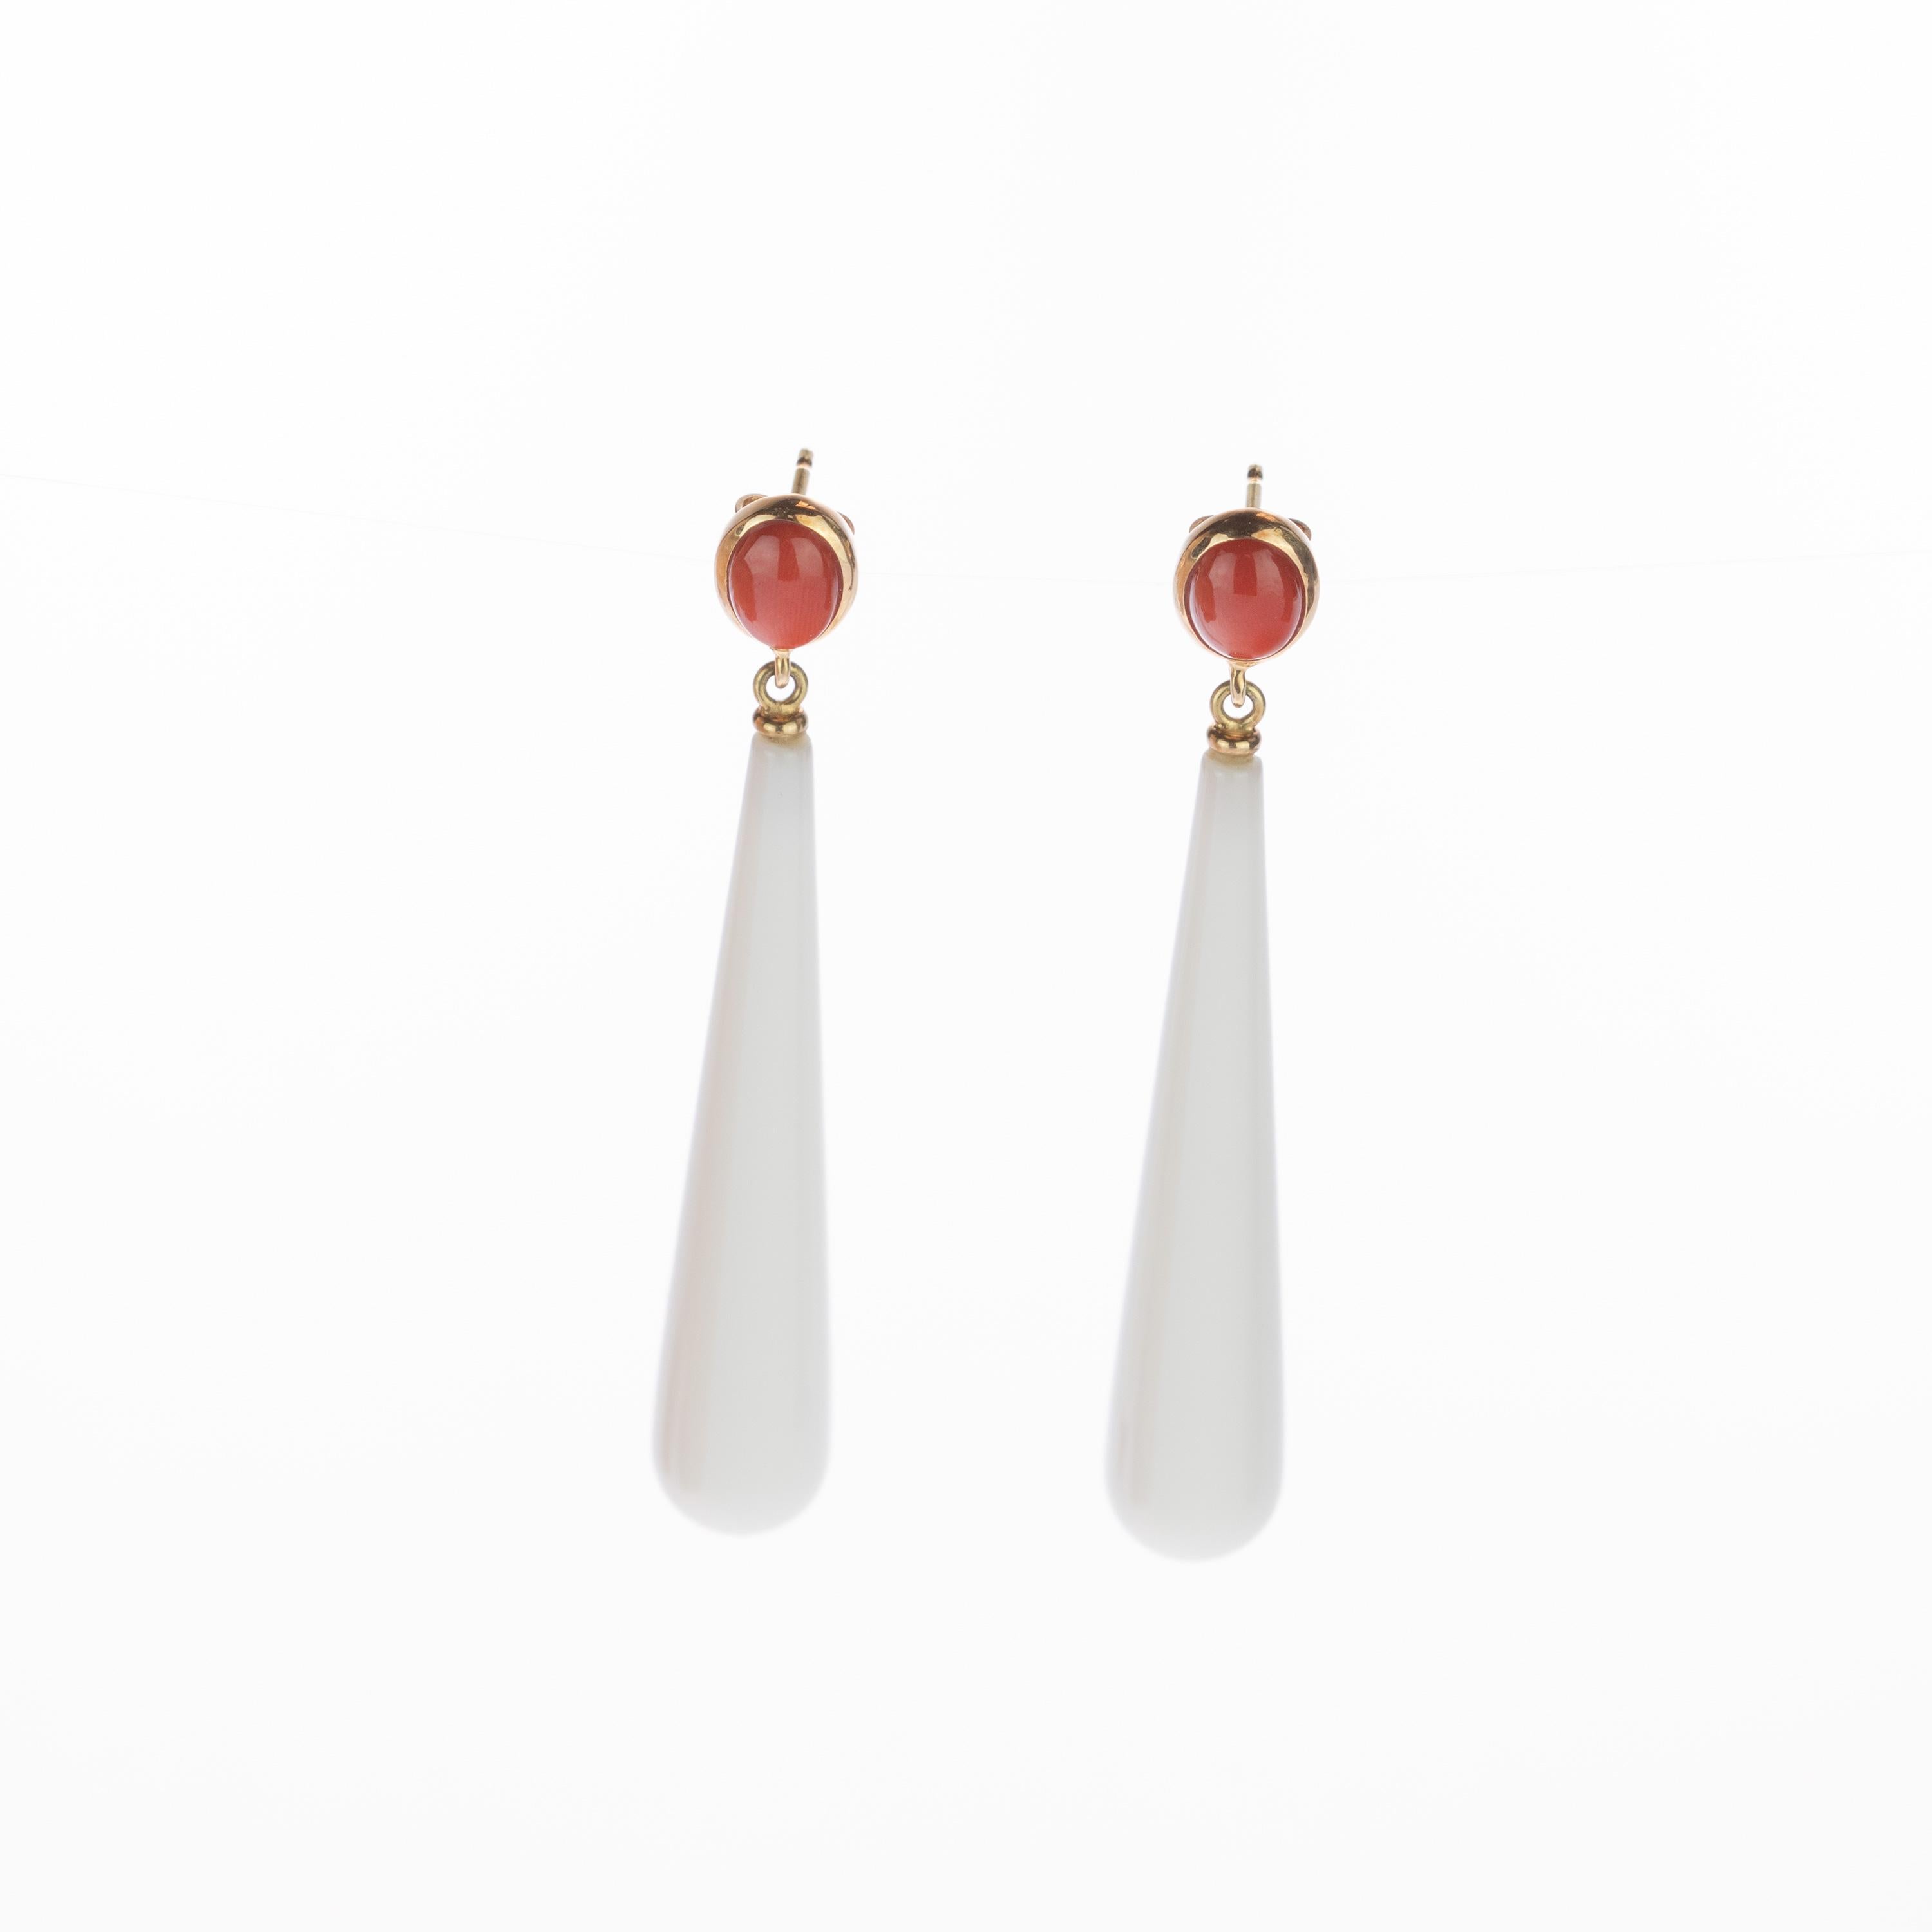 Fresh and youthful white bold white agate teardrop long earrings. Holded by a round mediterranean red coral surrounded by 18 karat yellow gold that recreates a stylish piece of jewelry that can highlight any look. The perfect touch full of modernity